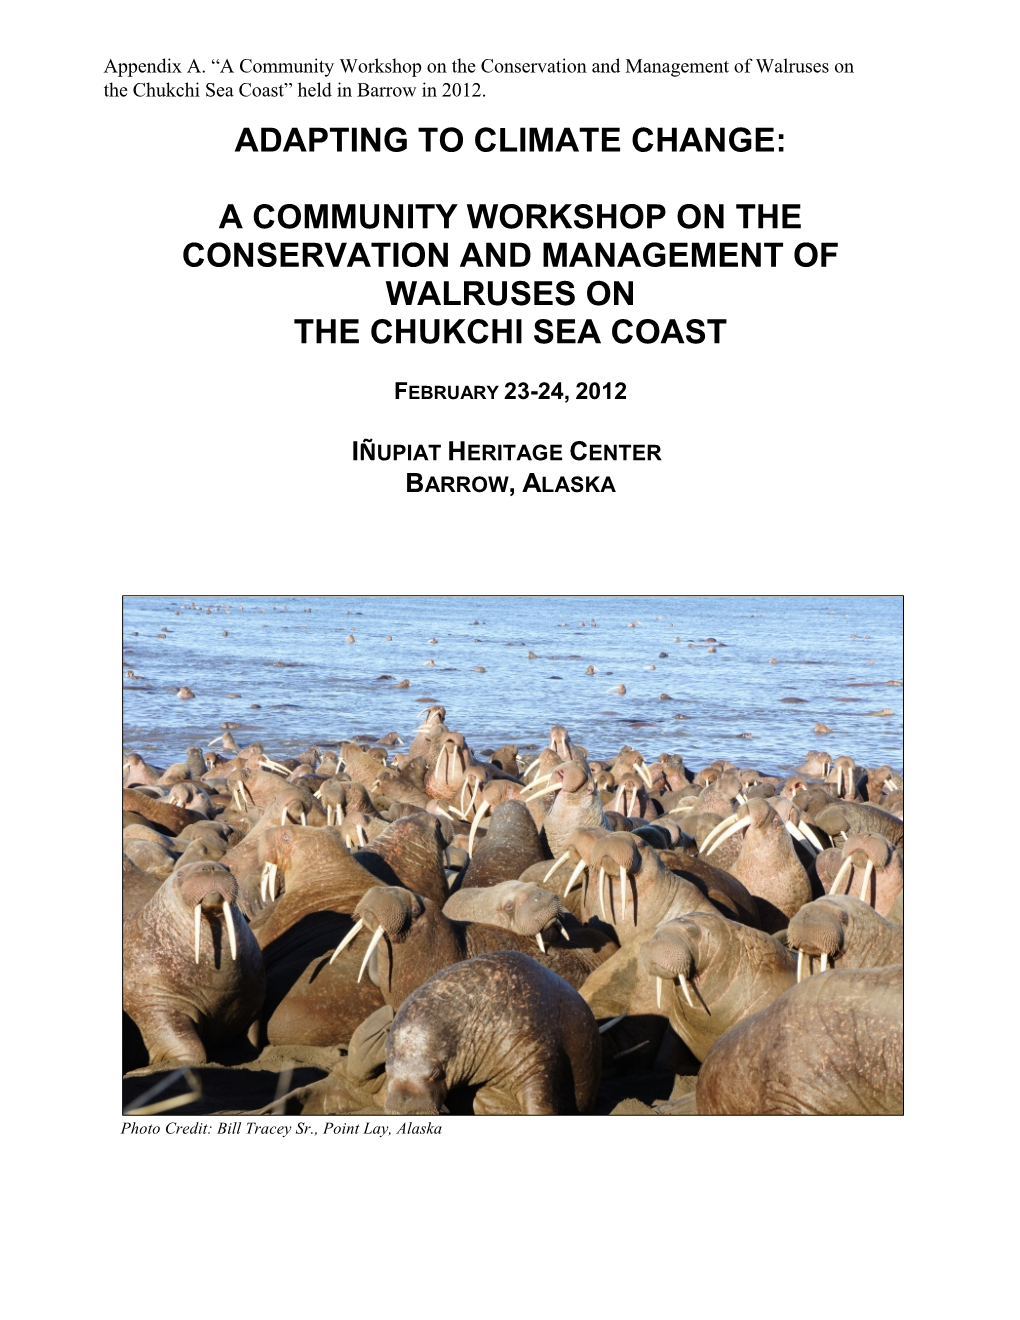 Adapting to Climate Change: a Community Workshop on the Conservation and Management of Walruses on the Chukchi Sea Coast